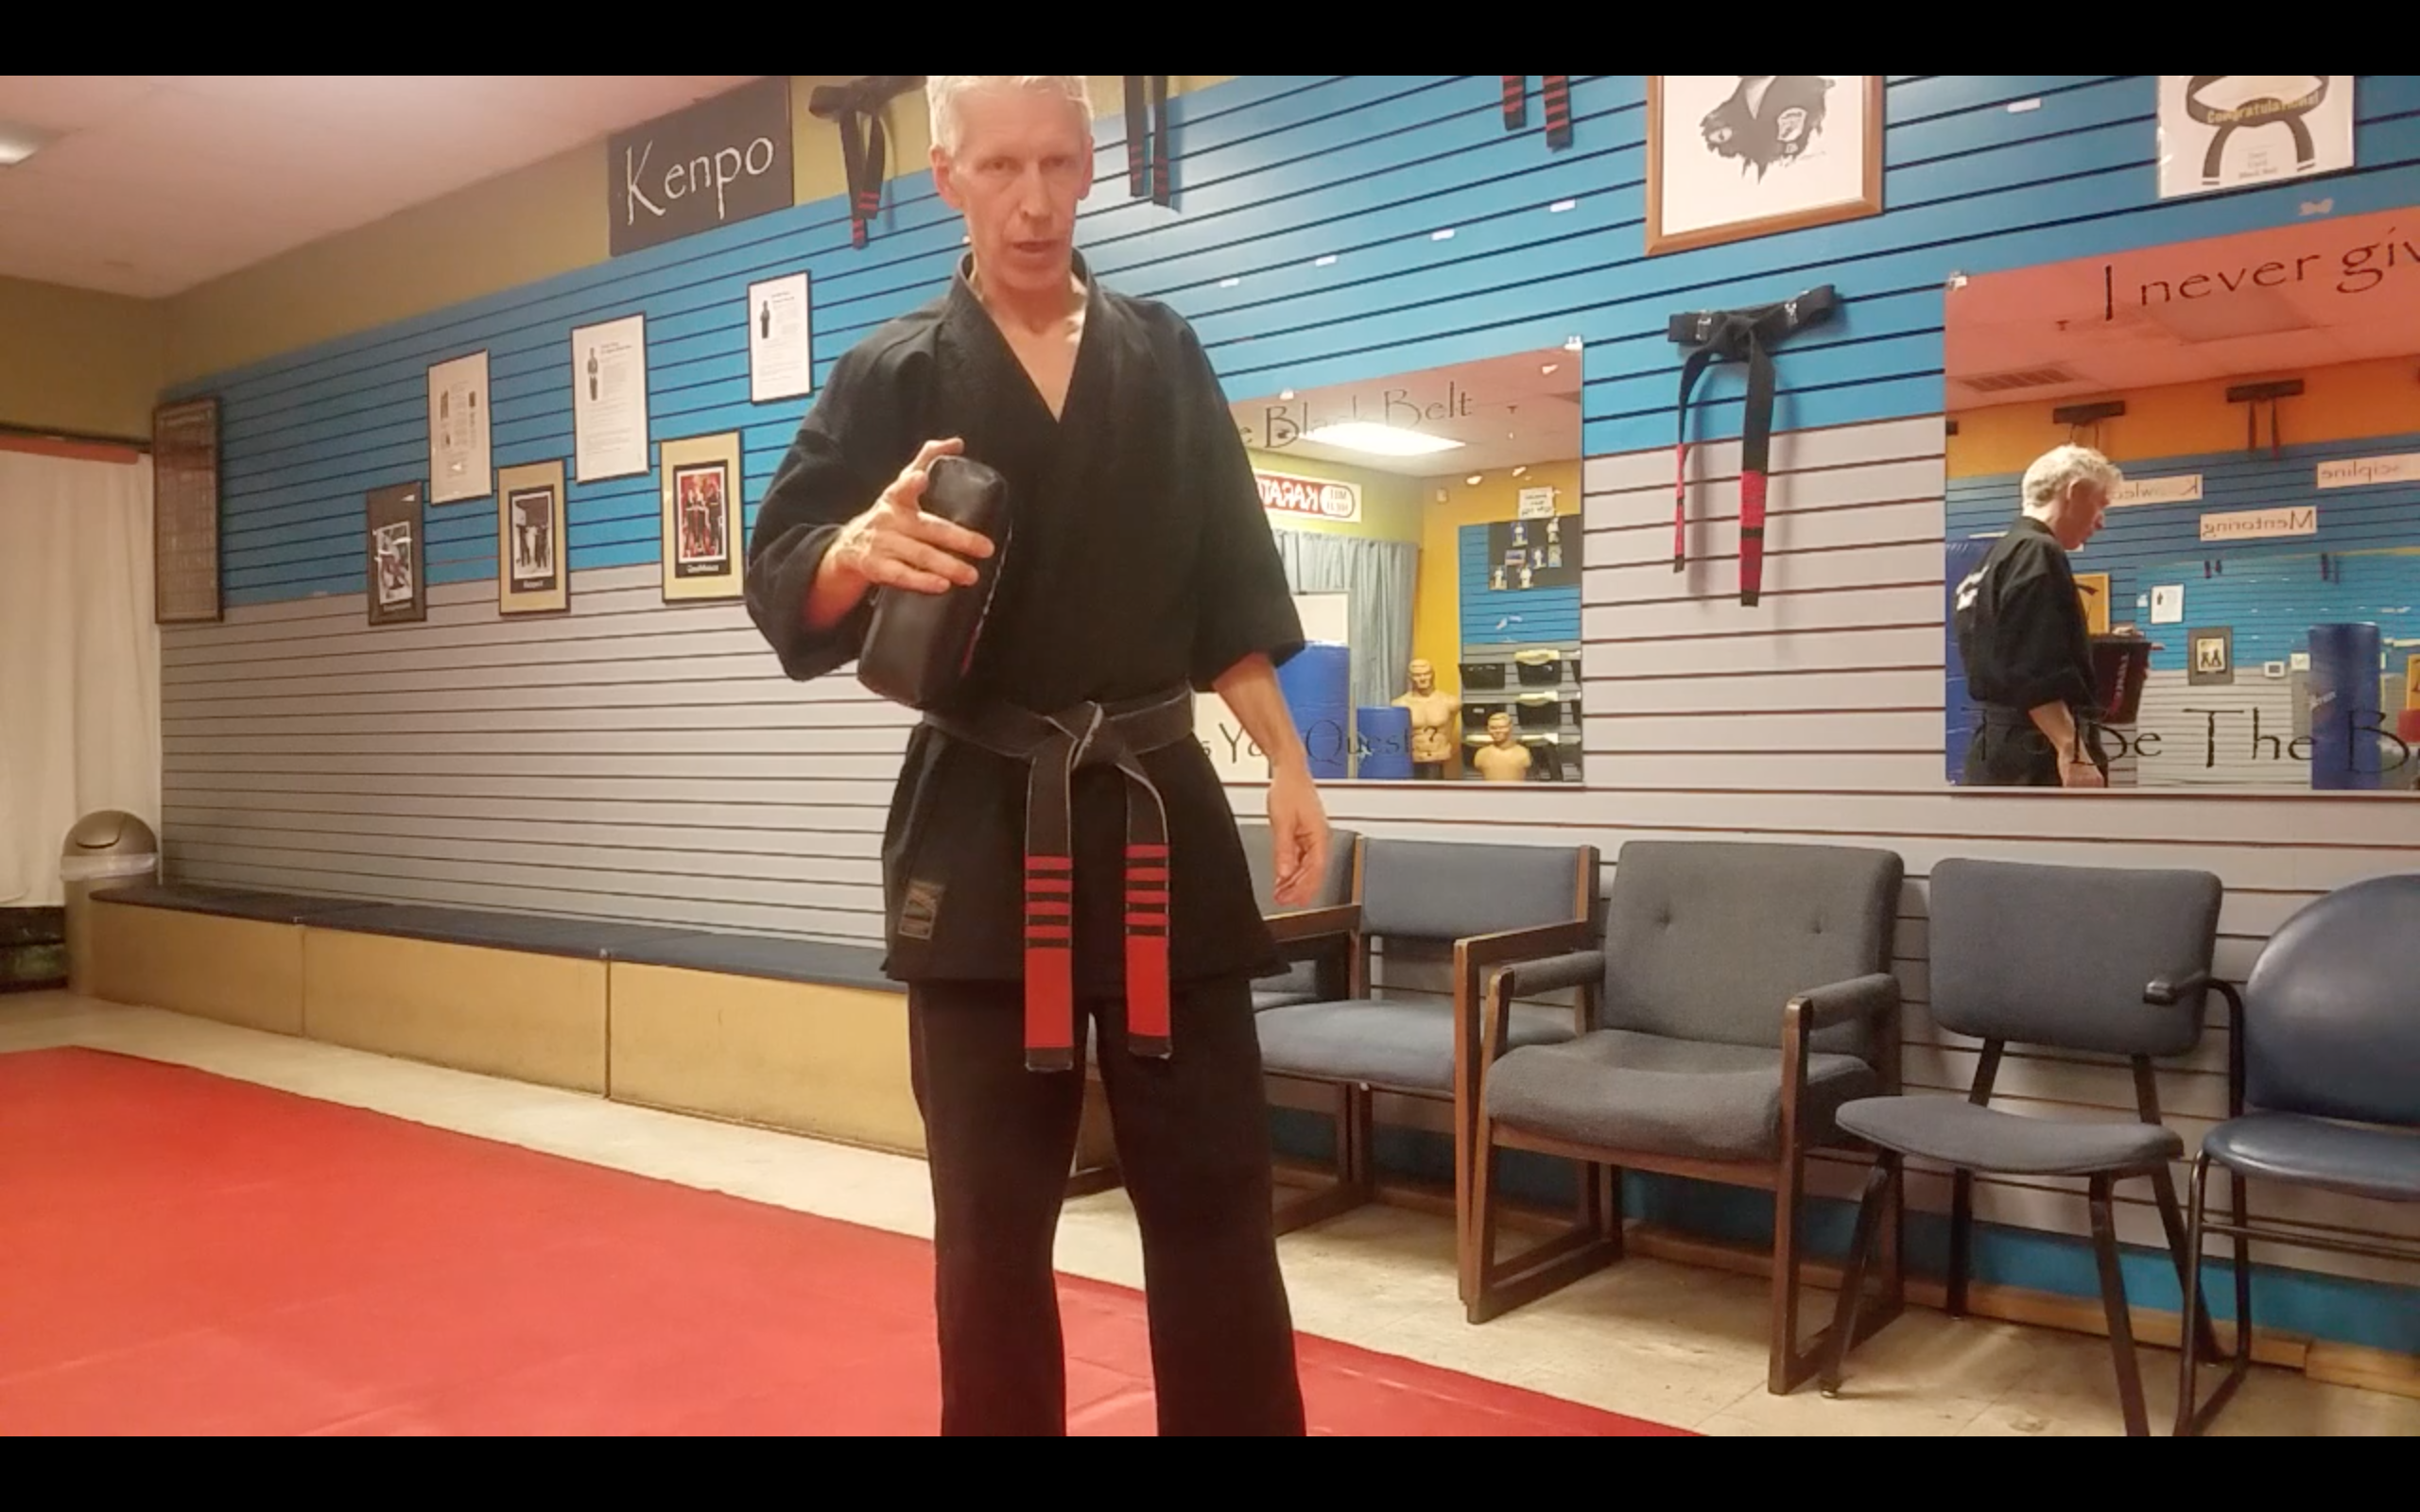 Practice Kenpo at home with your child